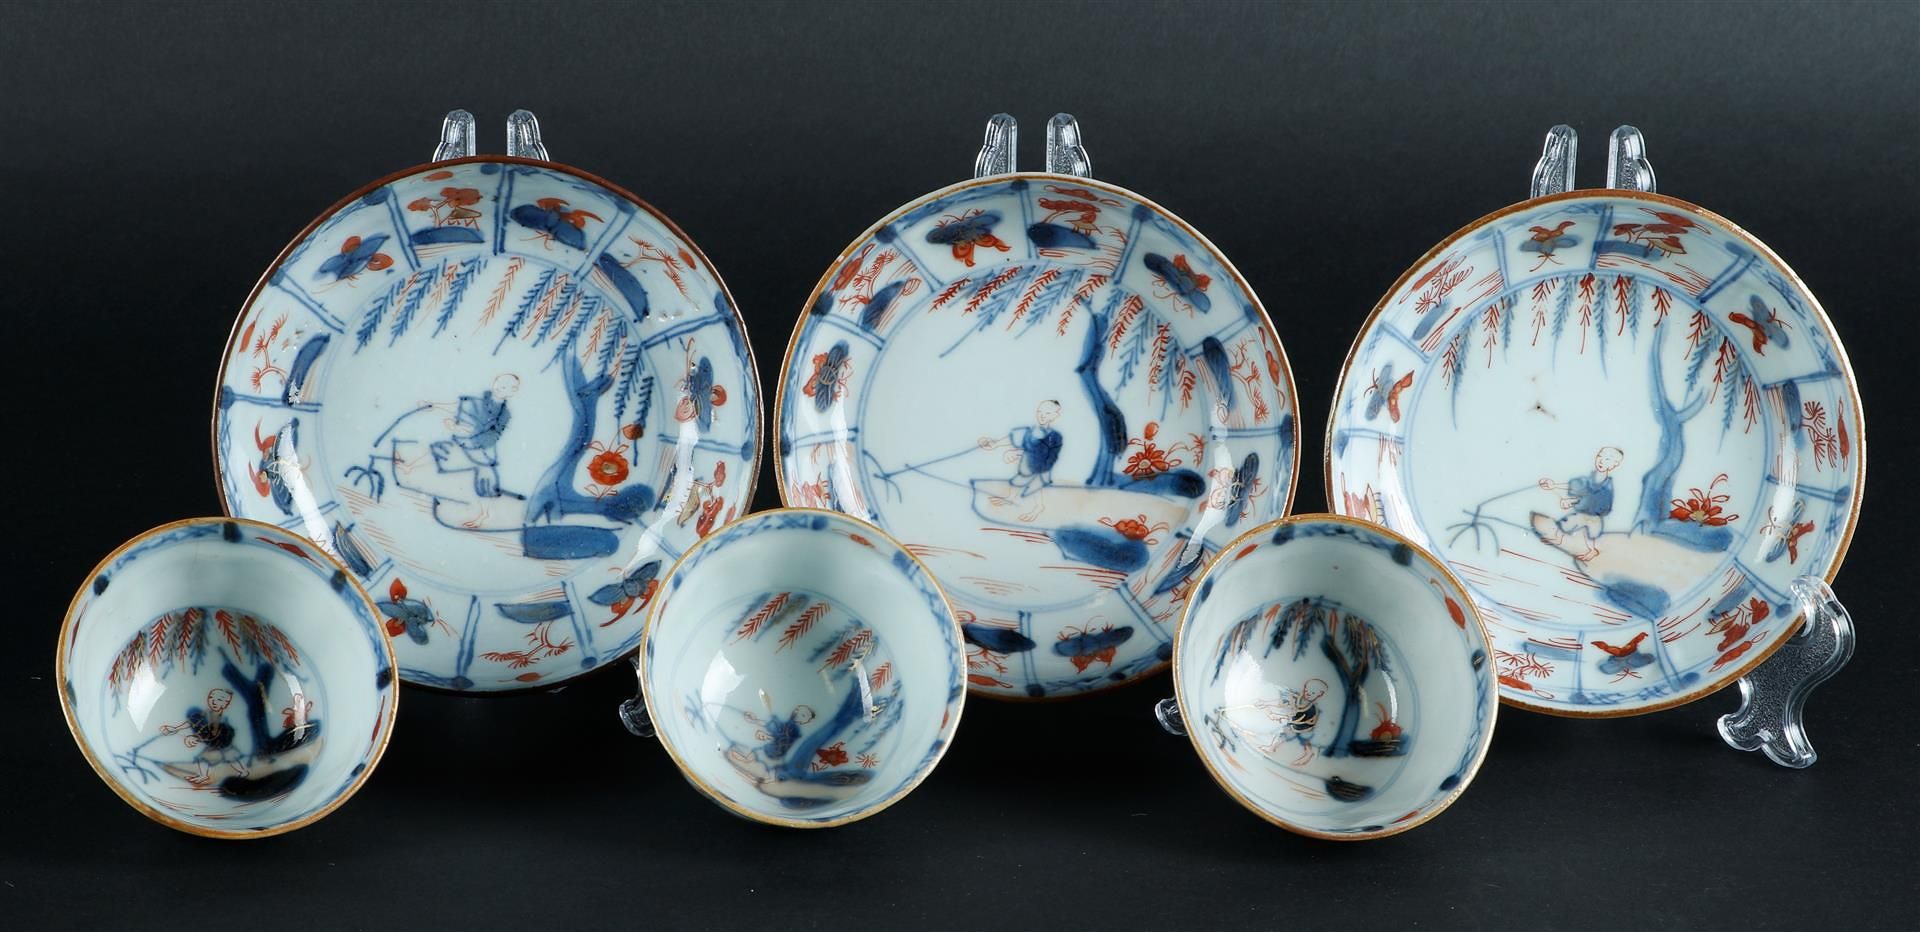 Three porcelain Imari cups and saucers with butterfly decor and floral decor, center with fisherman  - Image 3 of 4